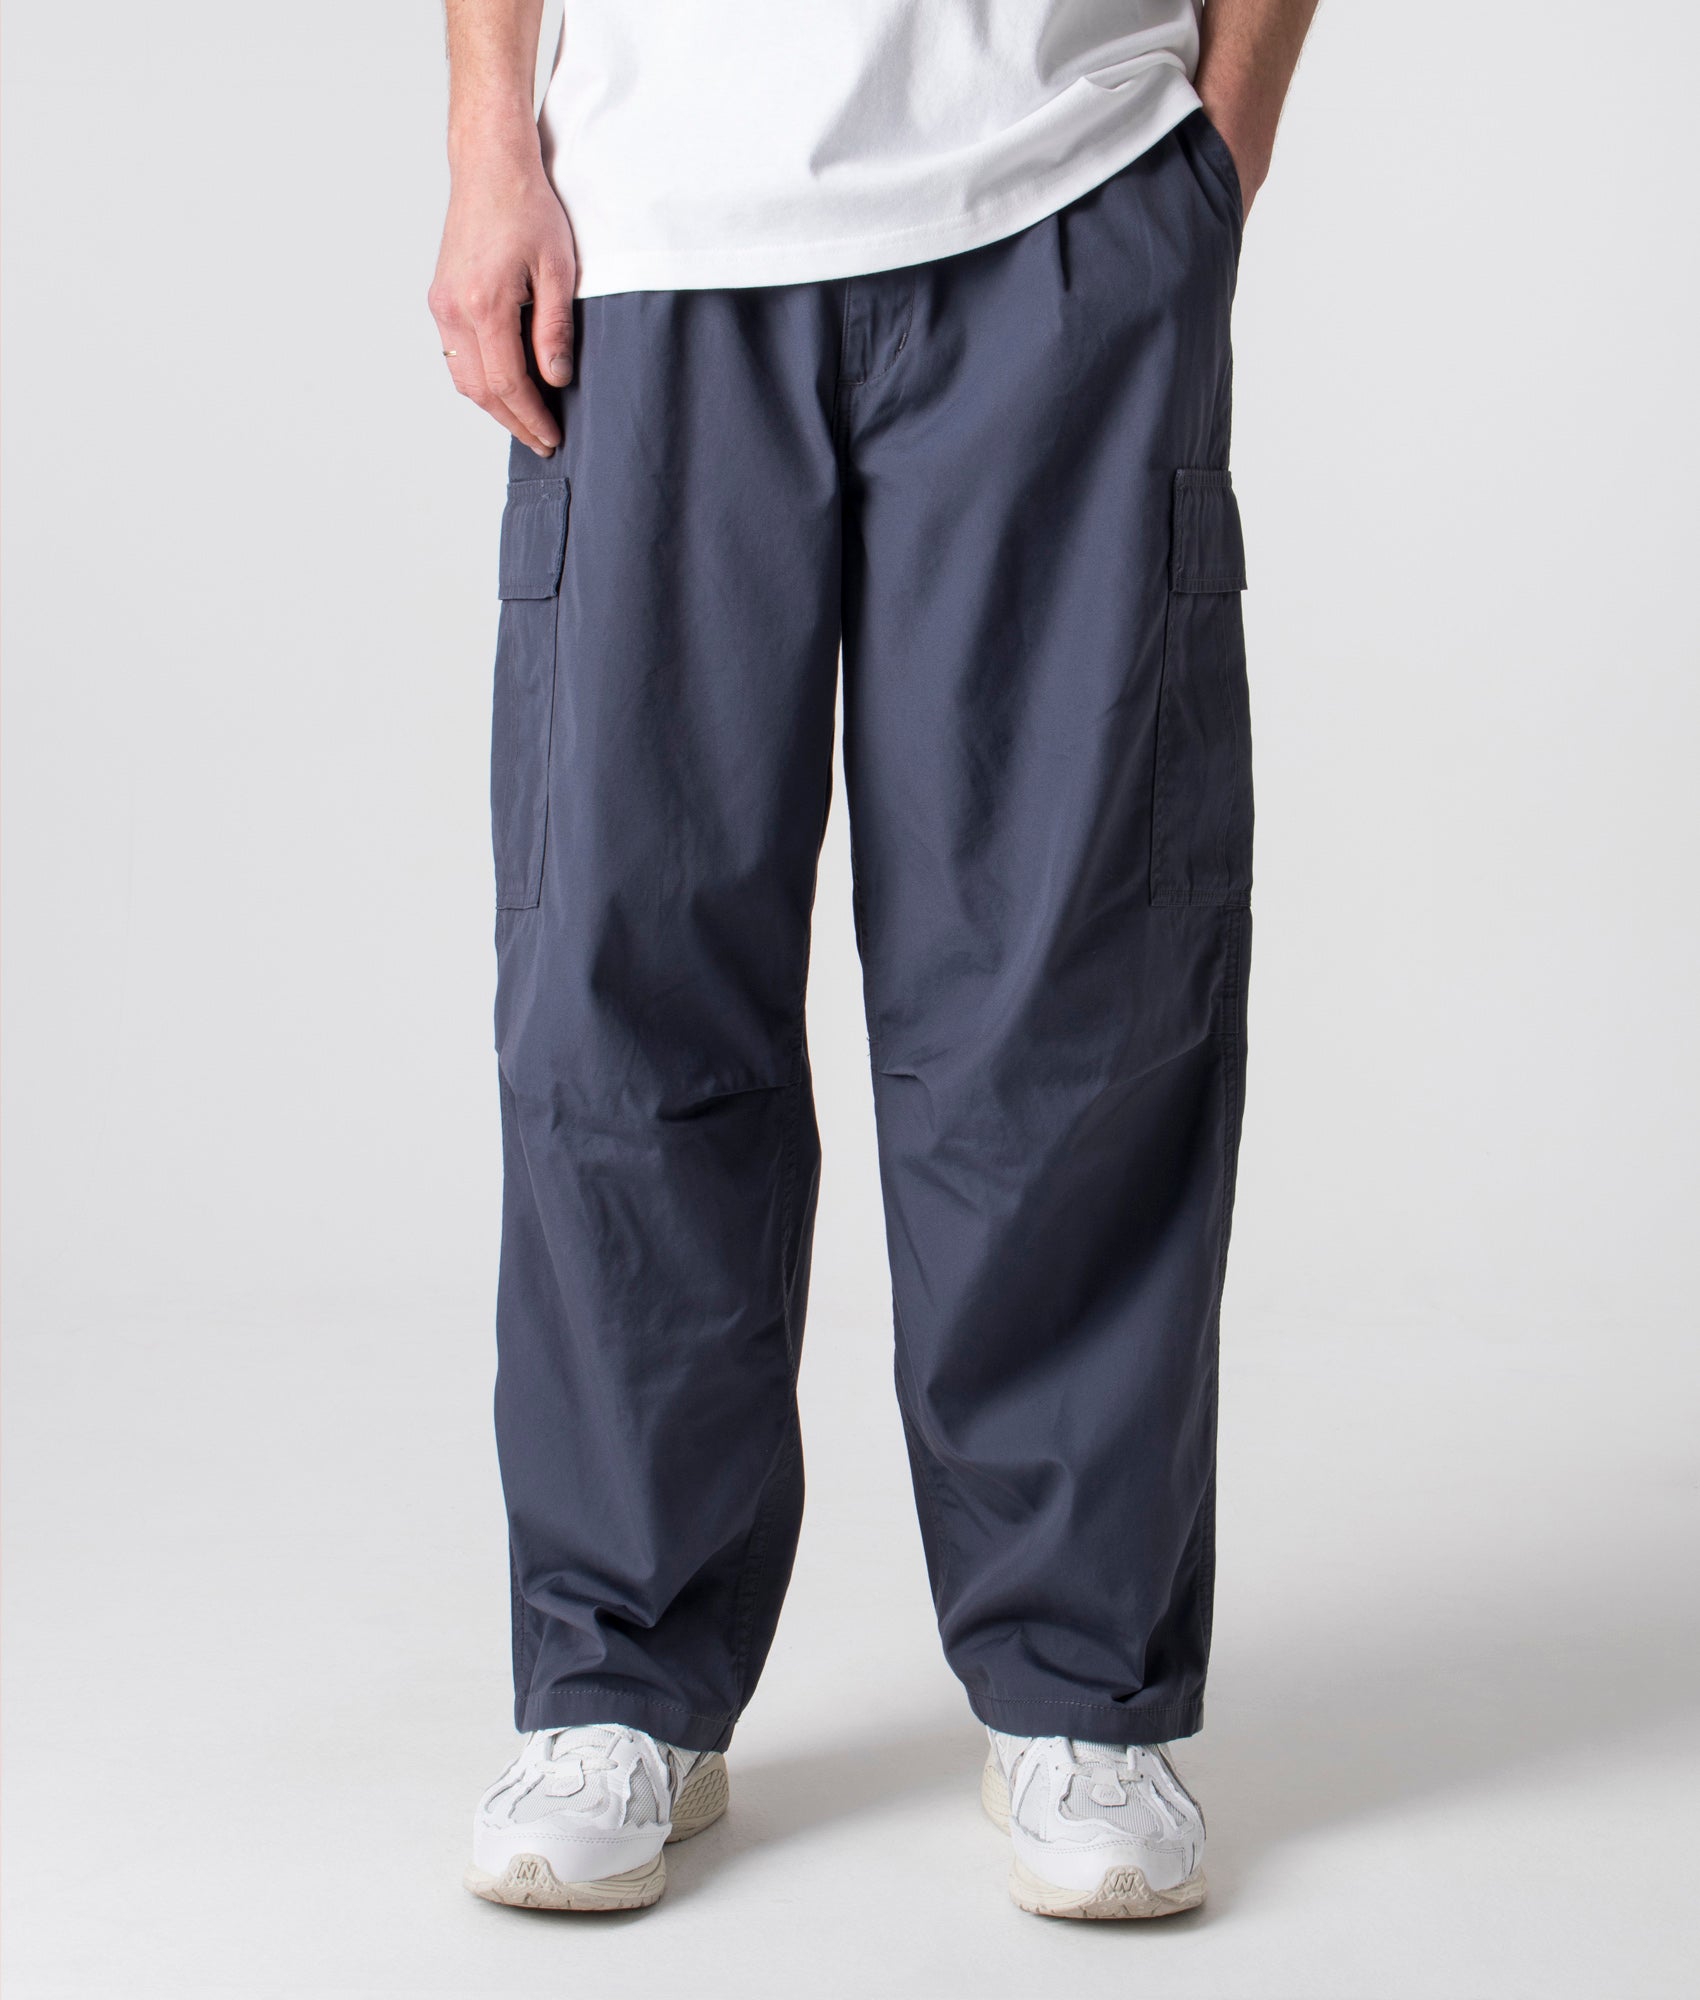 Carhartt WIP Mens Relaxed Fit Cole Cargo Pant - Colour: 1CQ02 Zeus Rinsed - Size: 28W